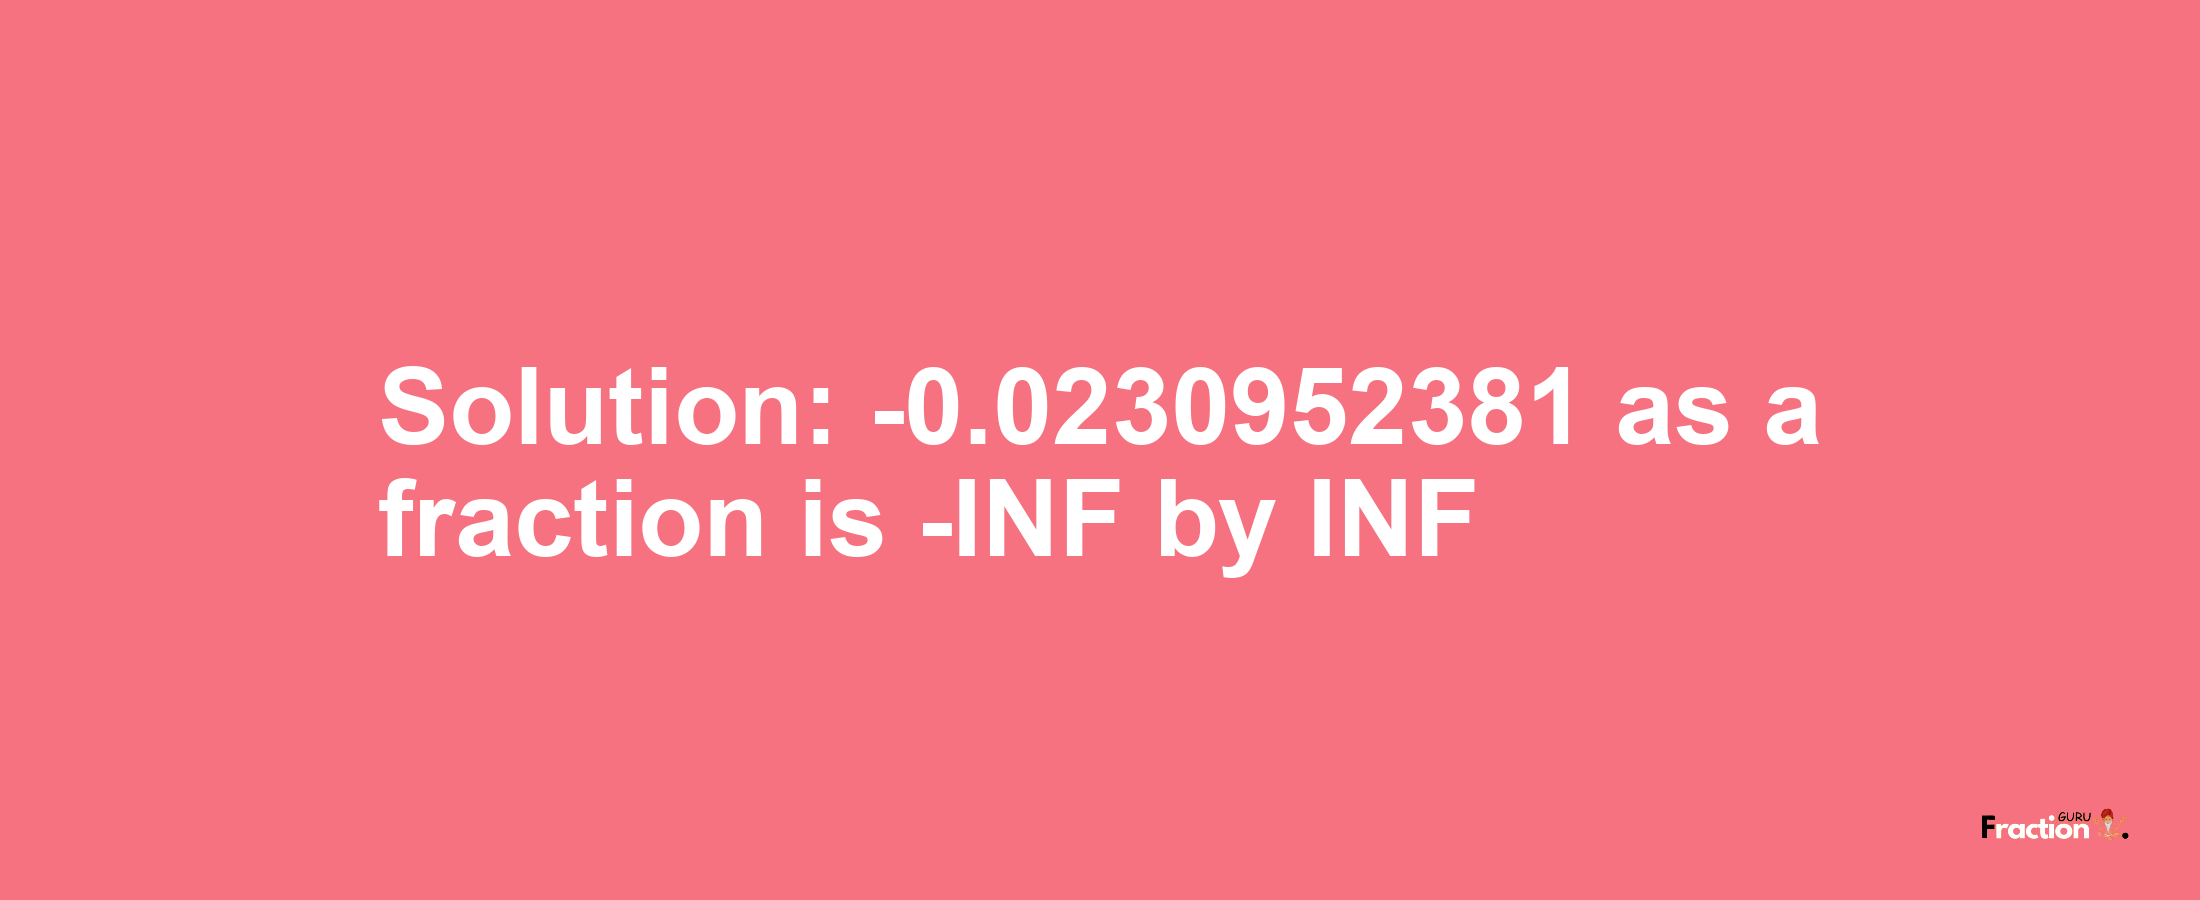 Solution:-0.0230952381 as a fraction is -INF/INF